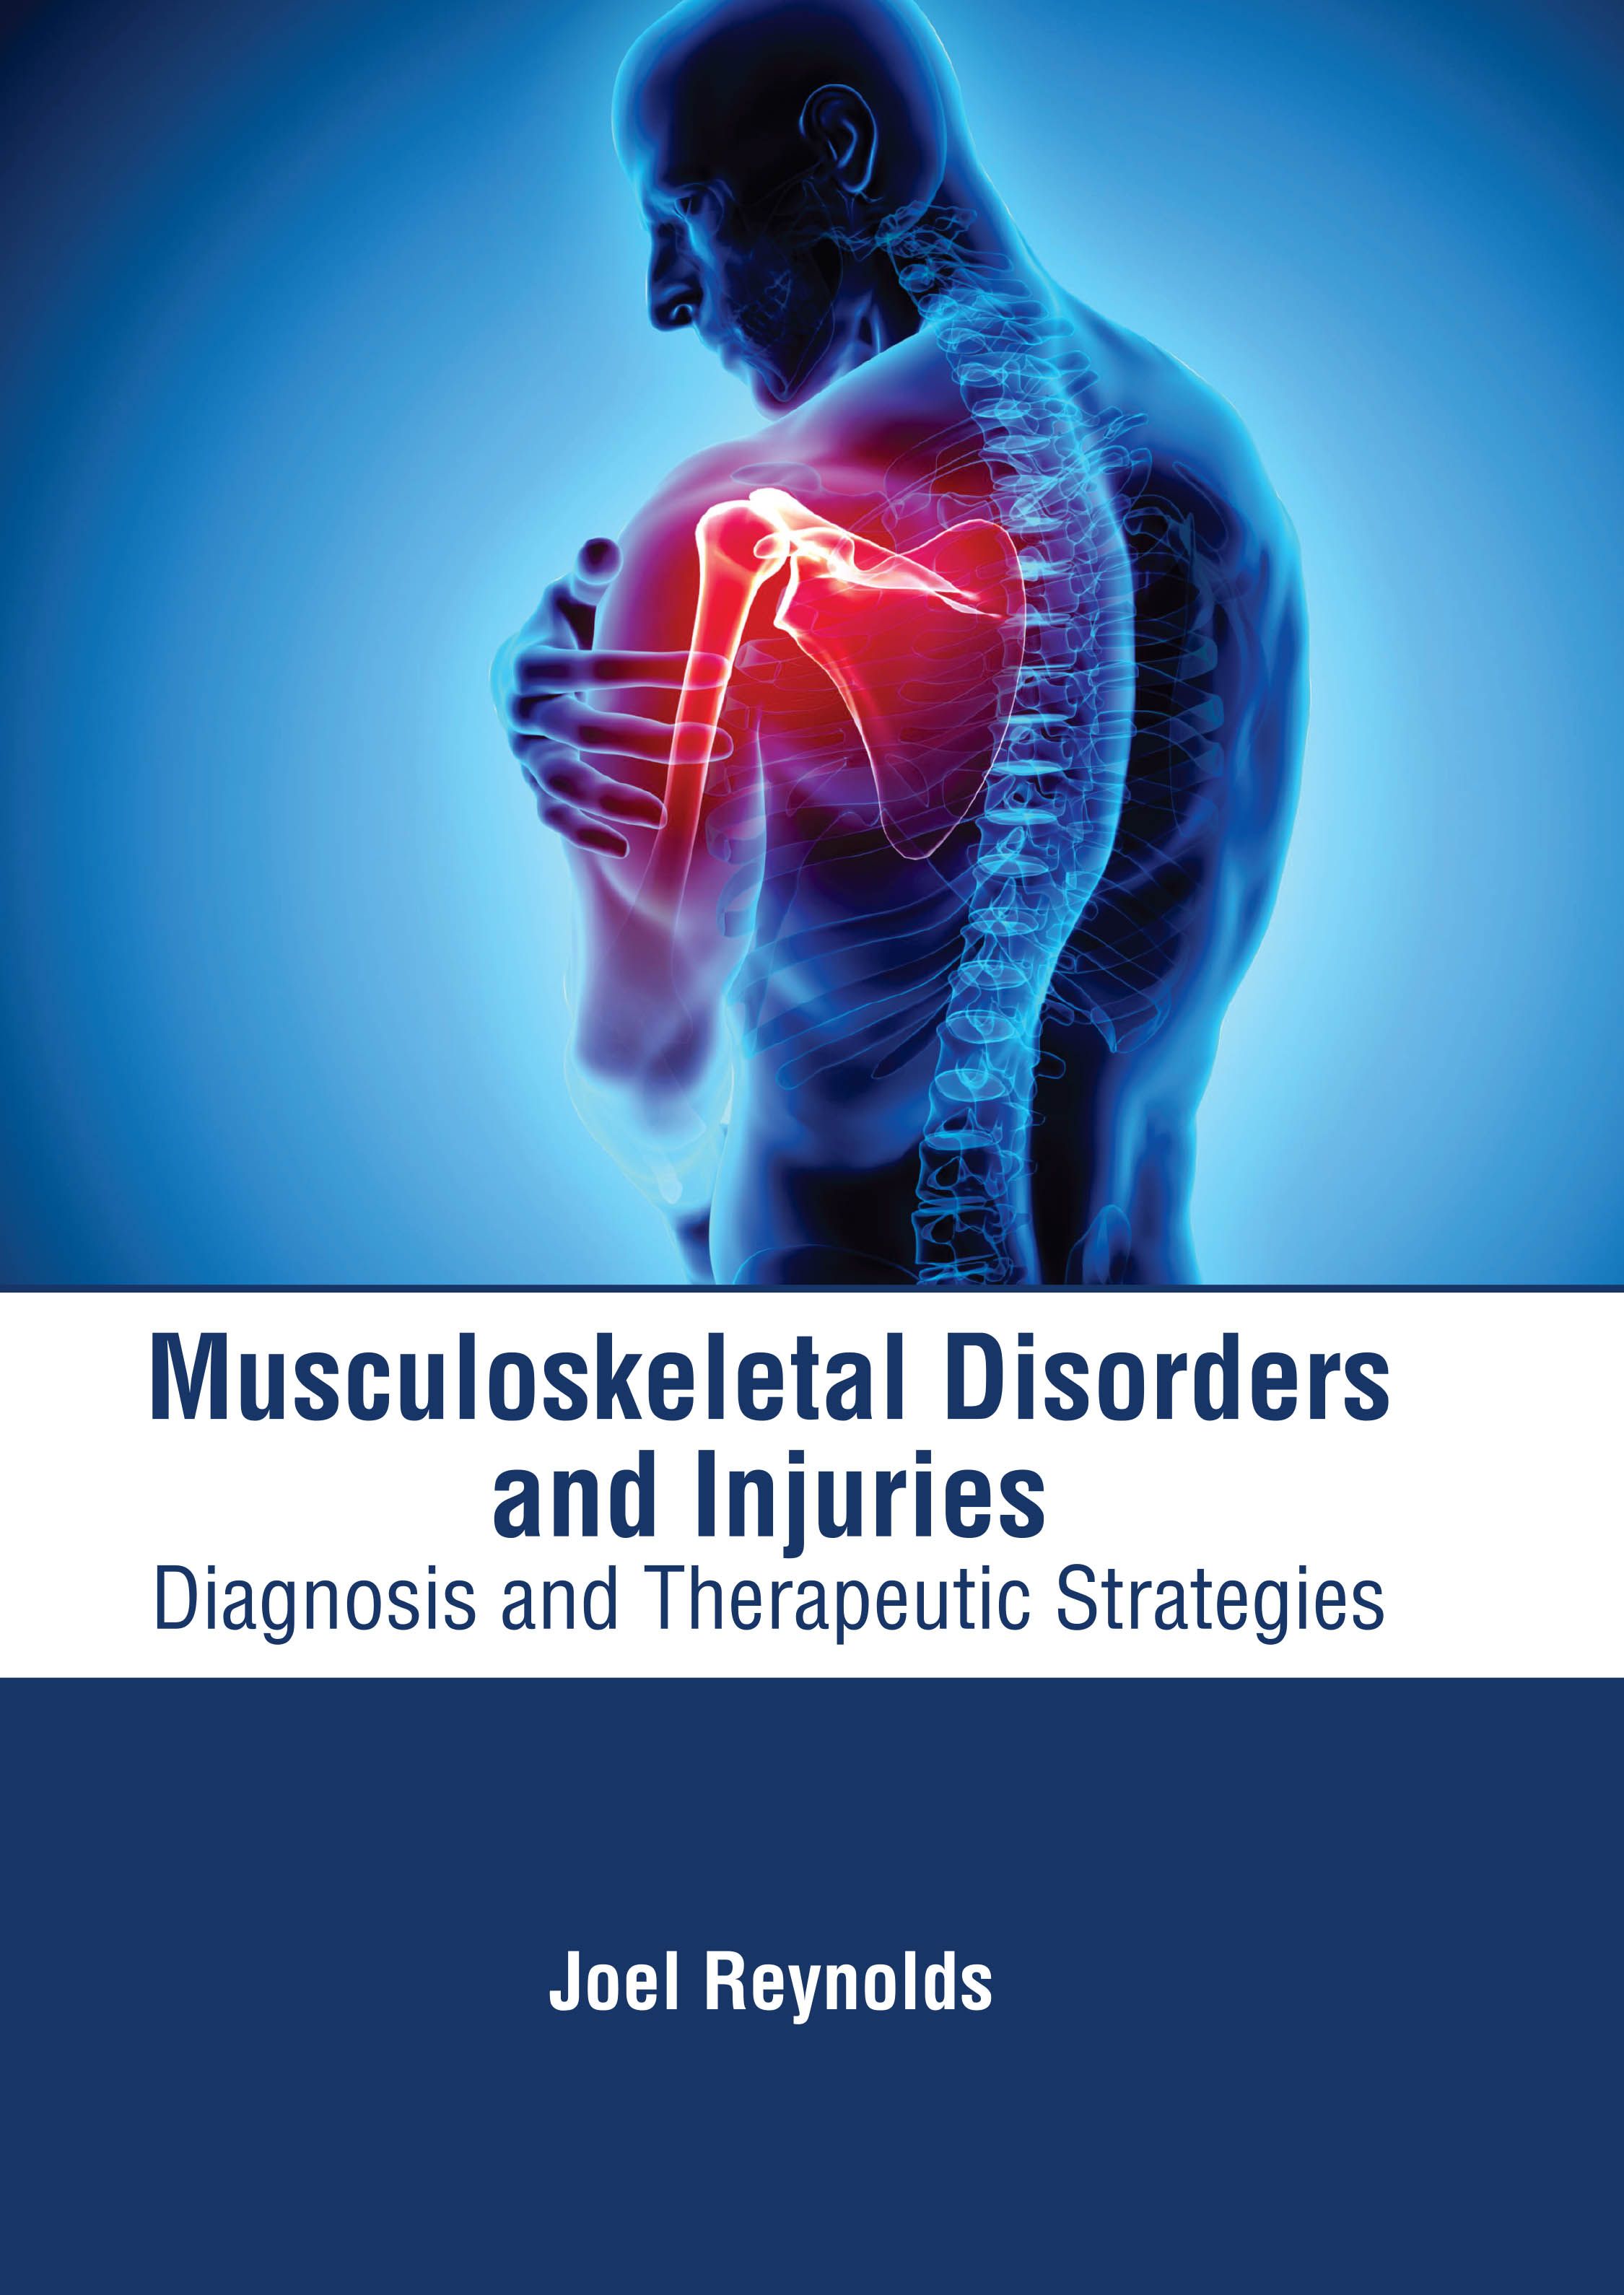 MUSCULOSKELETAL DISORDERS AND INJURIES: DIAGNOSIS AND THERAPEUTIC STRATEGIES | ISBN: 9781639274000